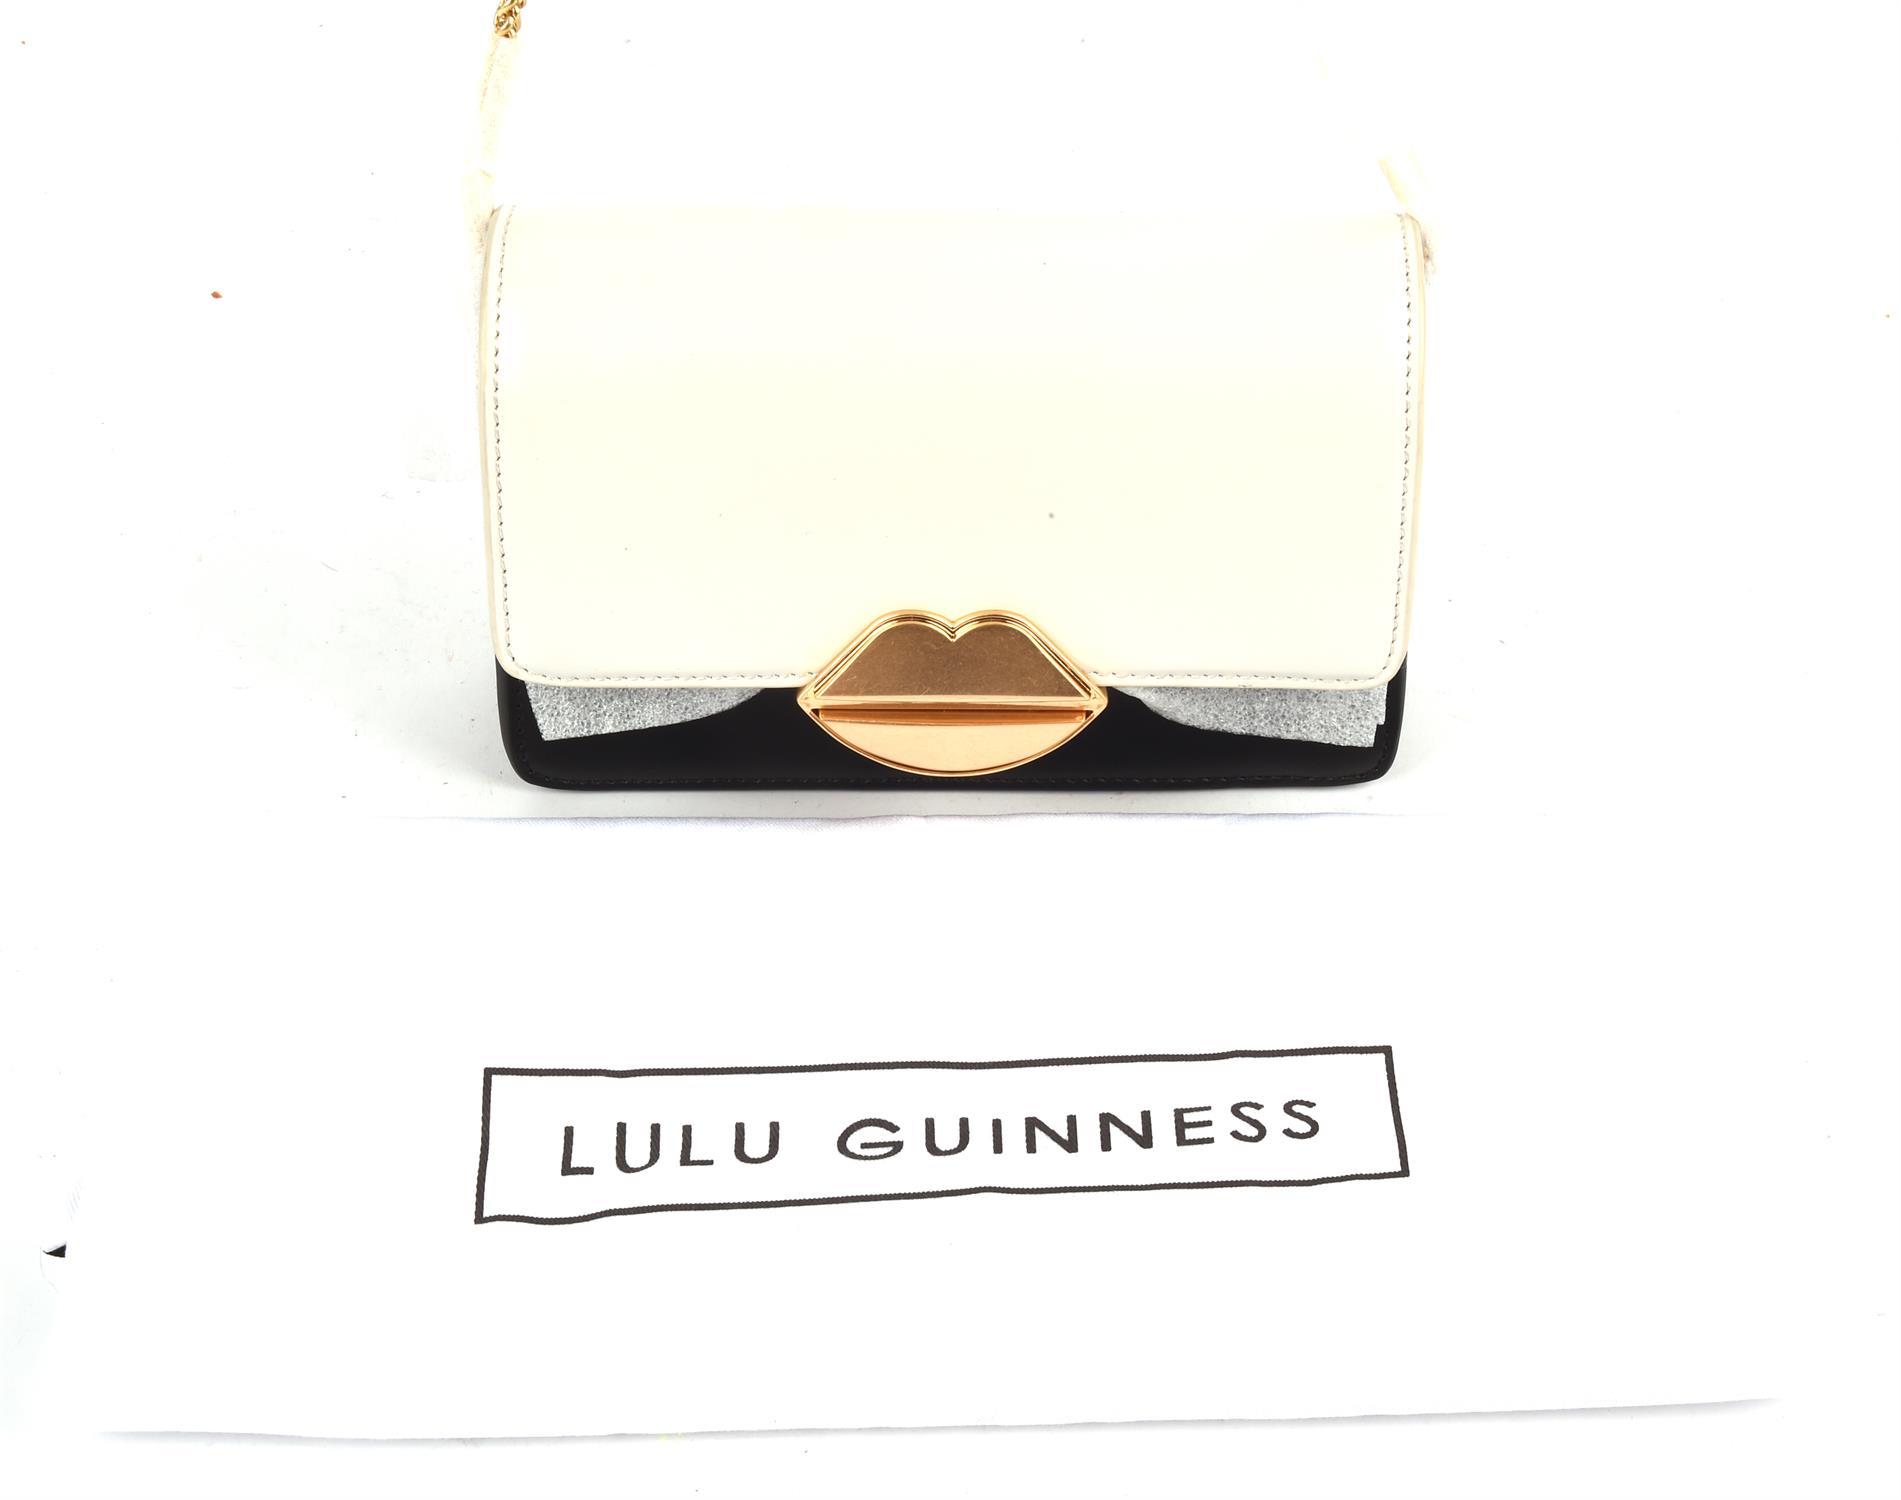 LULU GUINNESS small black and dove-grey leather small crossbody handbag with long gold chain, - Image 2 of 7